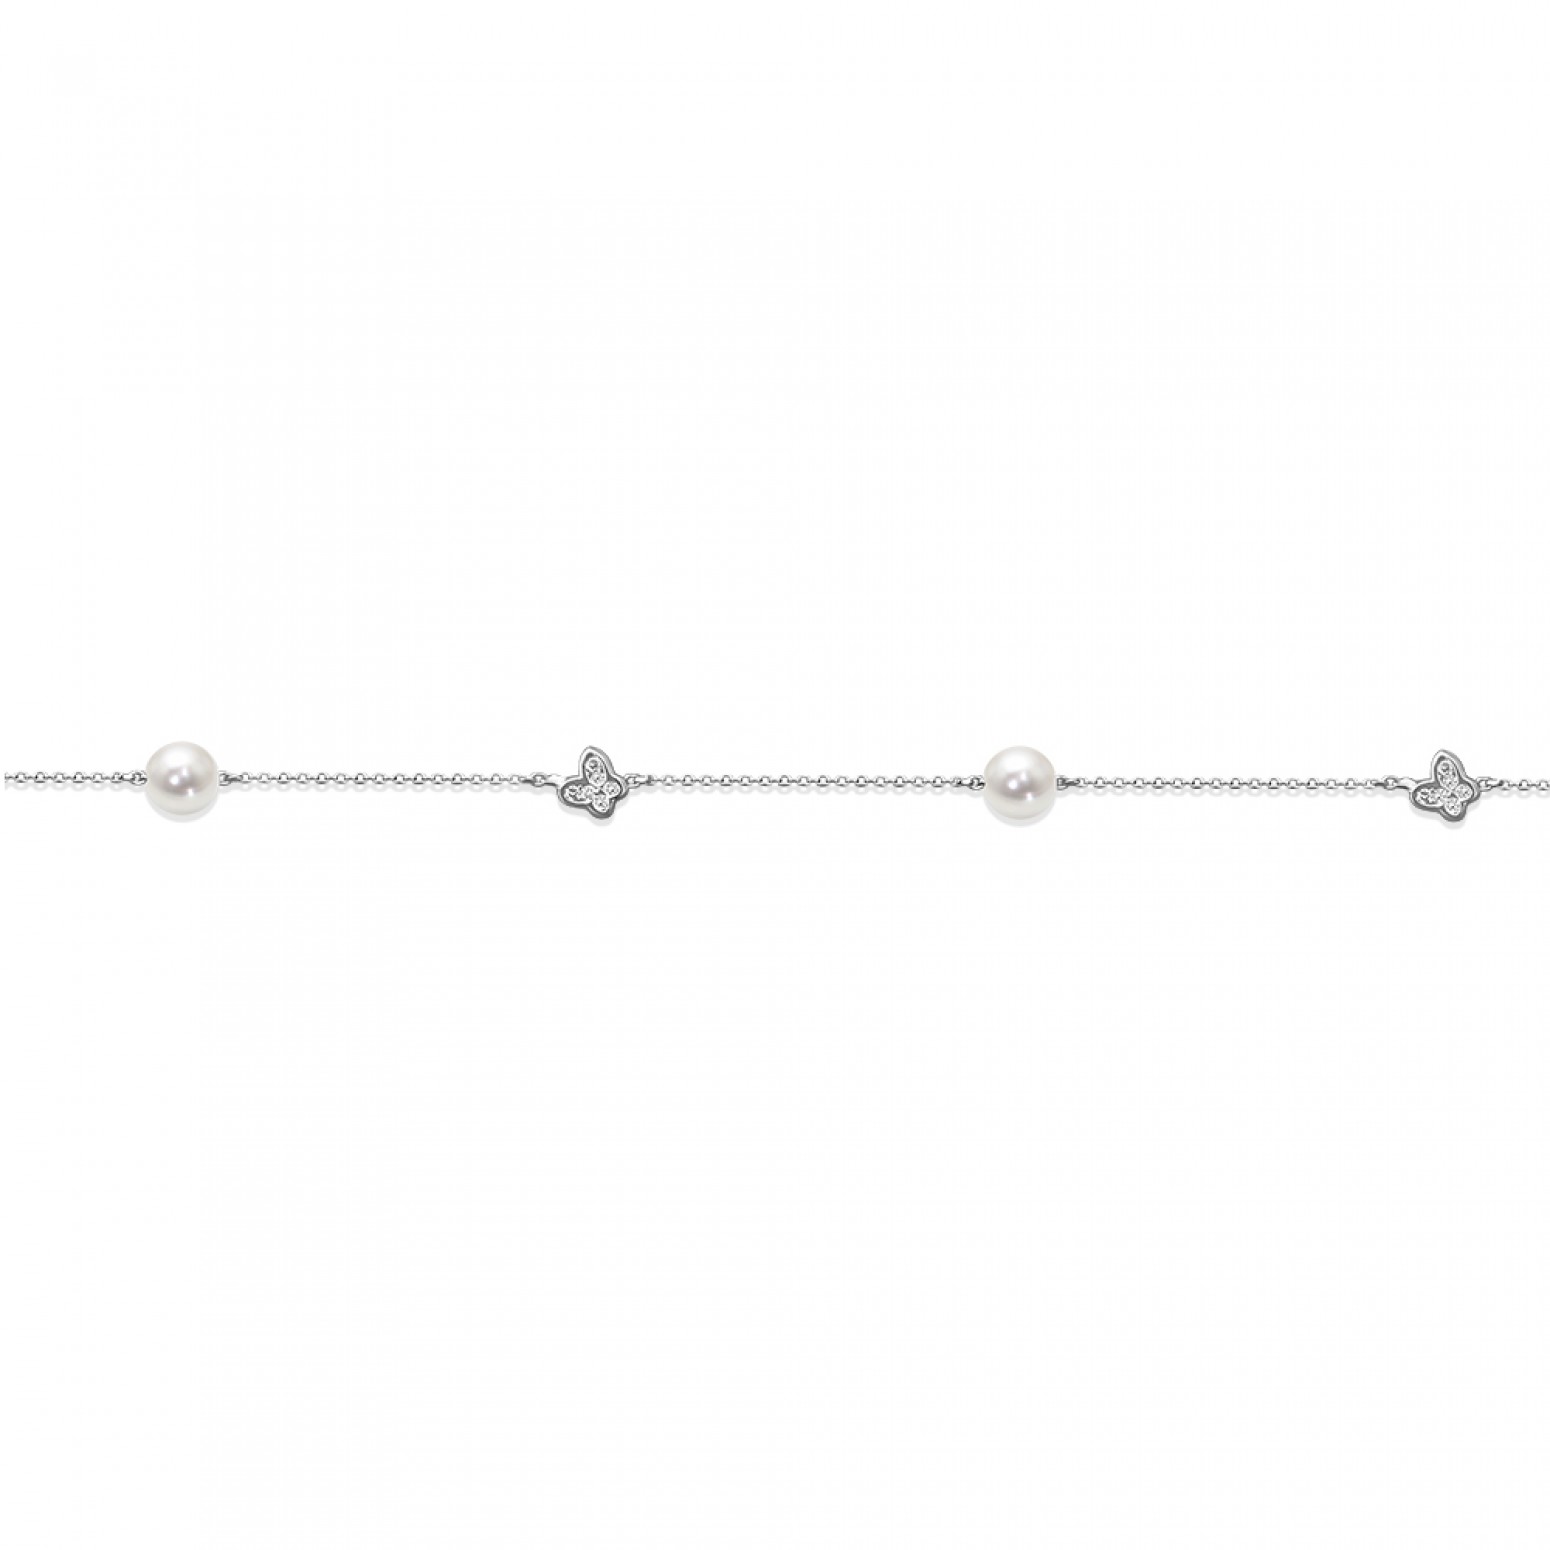 Bracelet with butterflies, Κ14 white gold with pearls and zircon, H br2381 BRACELETS Κοσμηματα - chrilia.gr